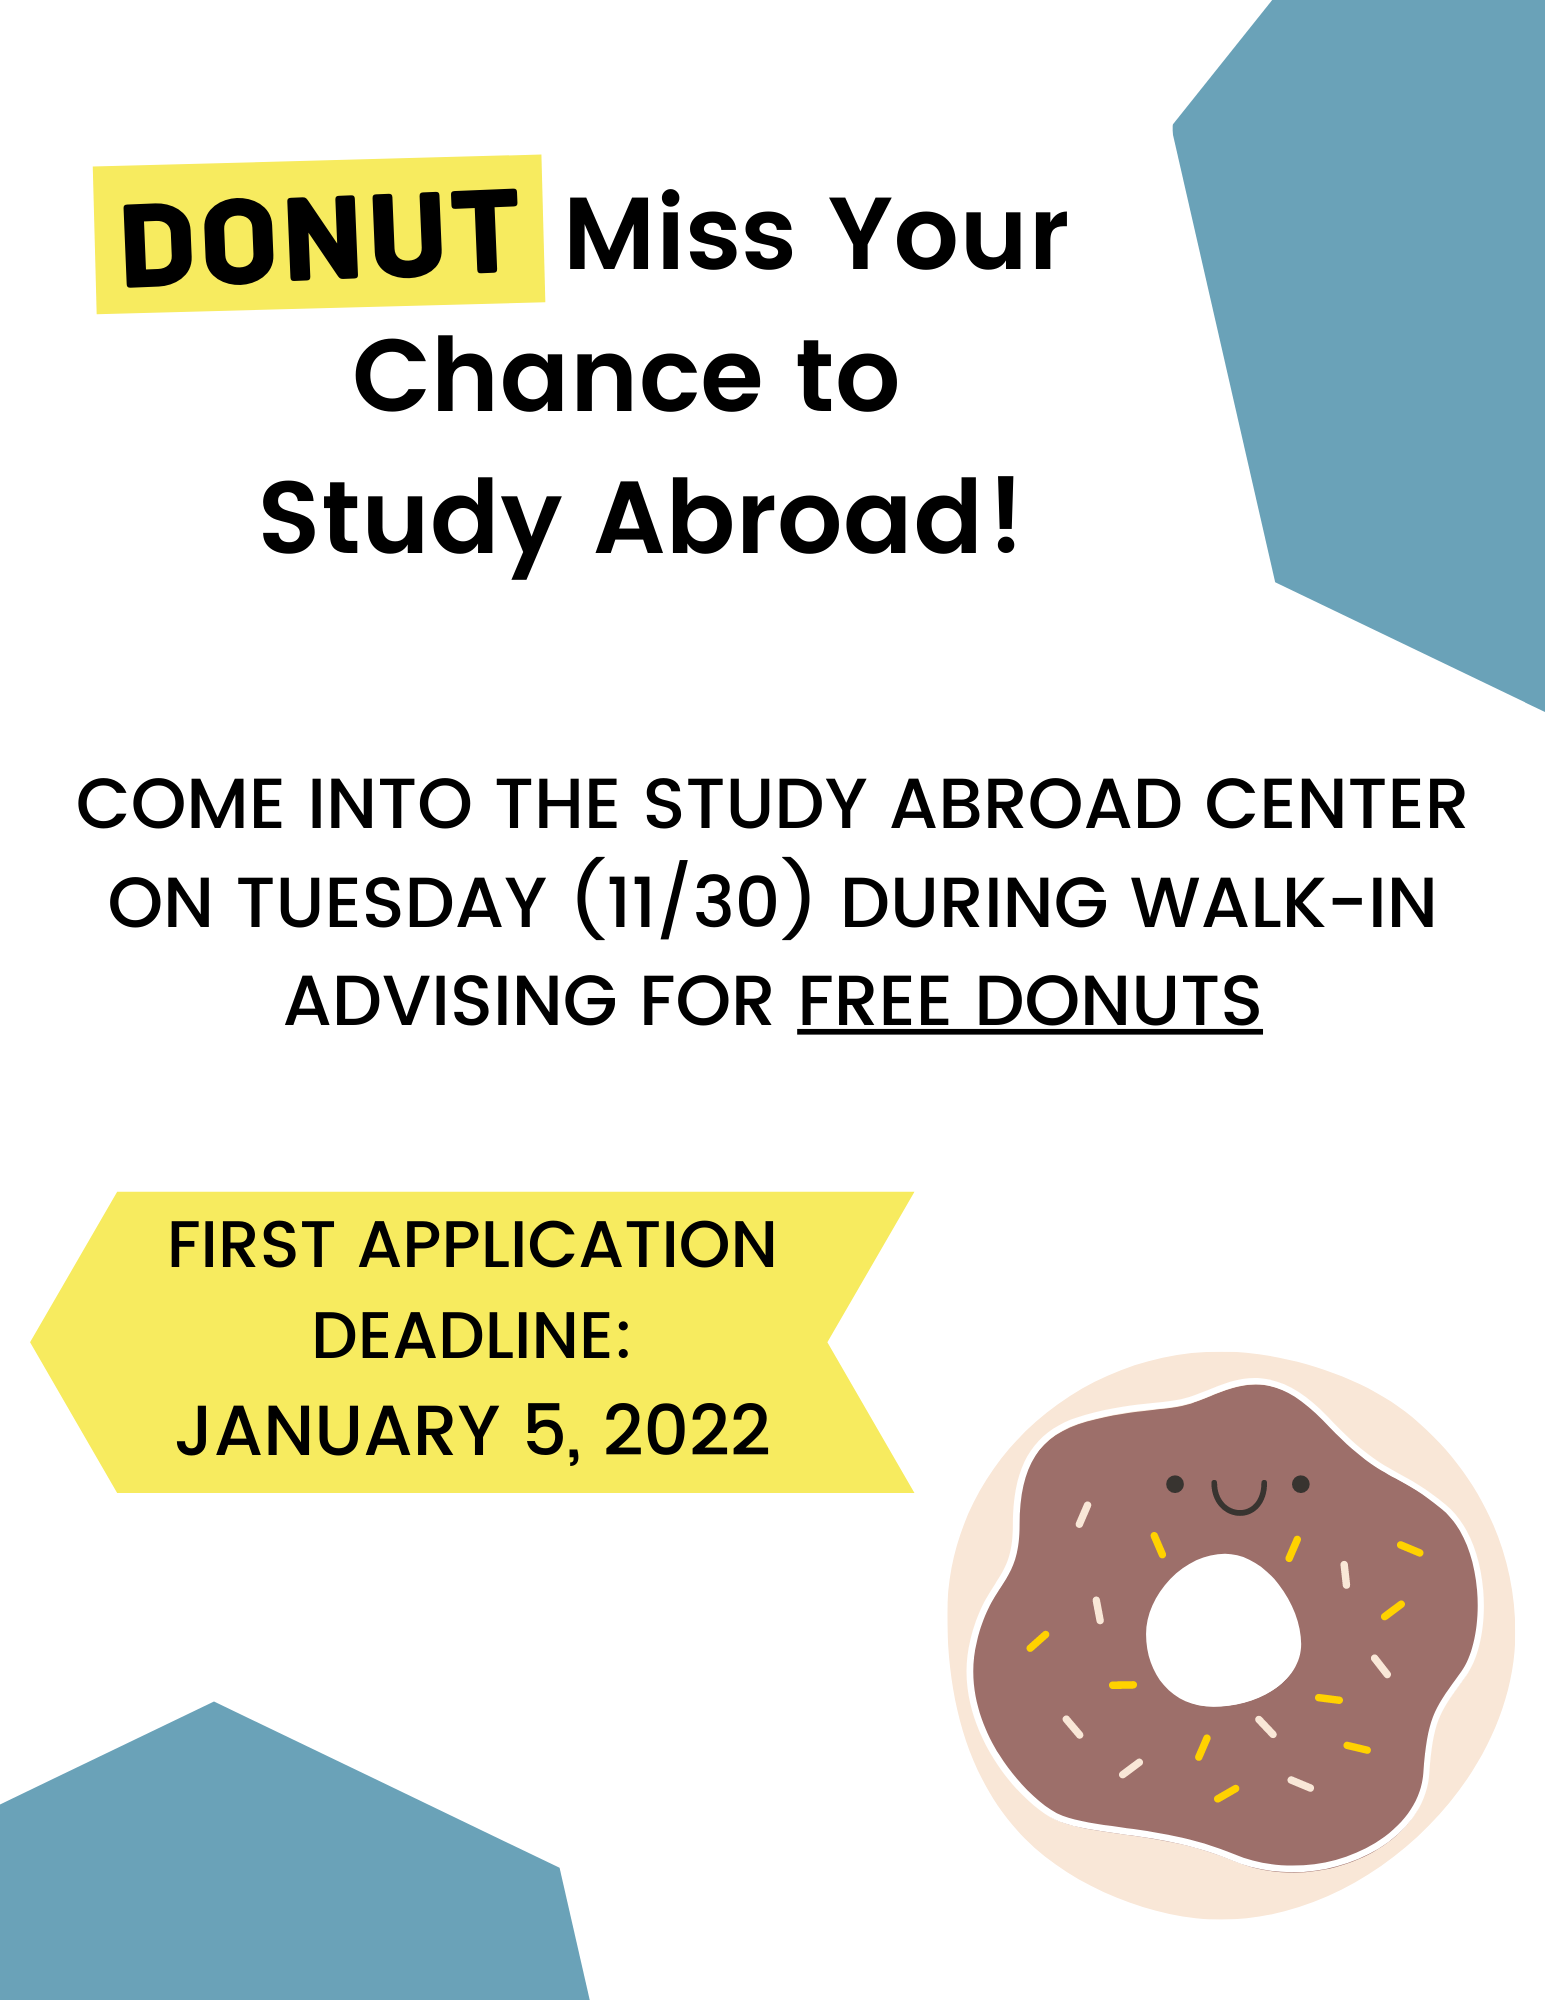 Donut miss your chance to study abroad! Come into the Study Abroad Center on Tuesday November 30th during walk-in advising for free donuts. First Application Deadline: January 5th, 2022.